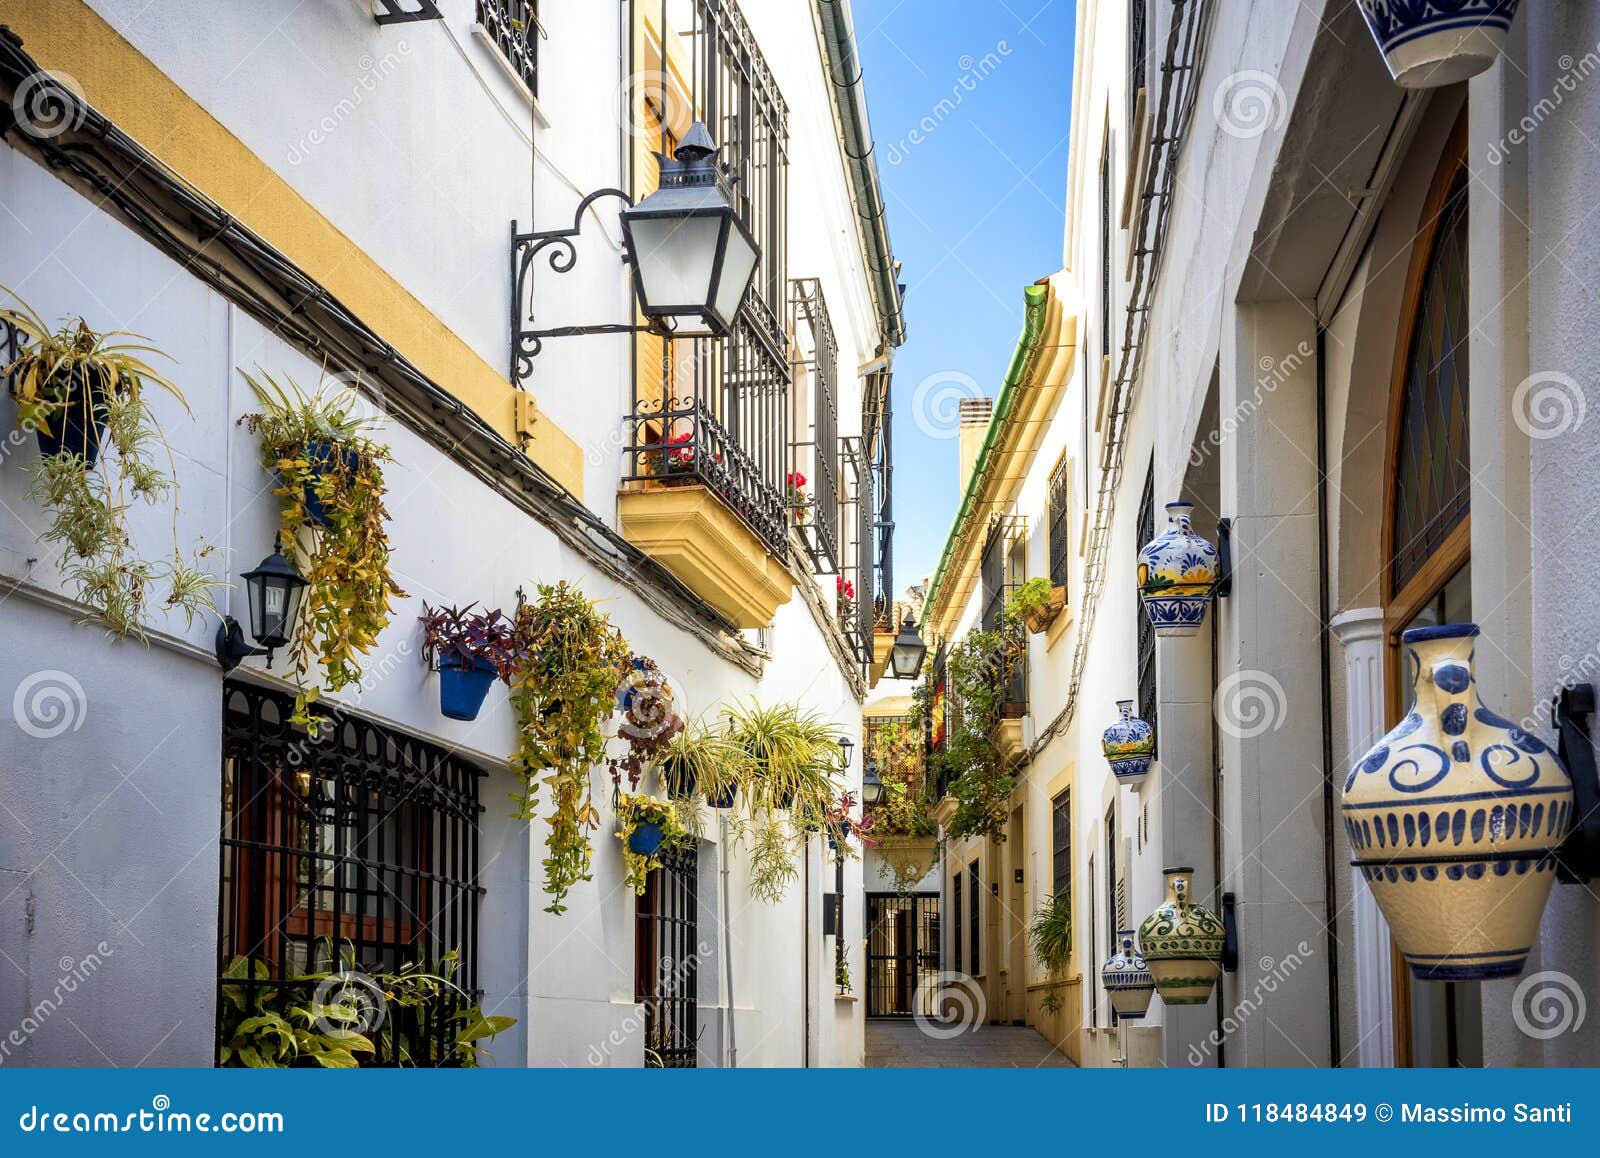 cordoba: old typical street in the juderia with plants and flowers. andalucia, spain.